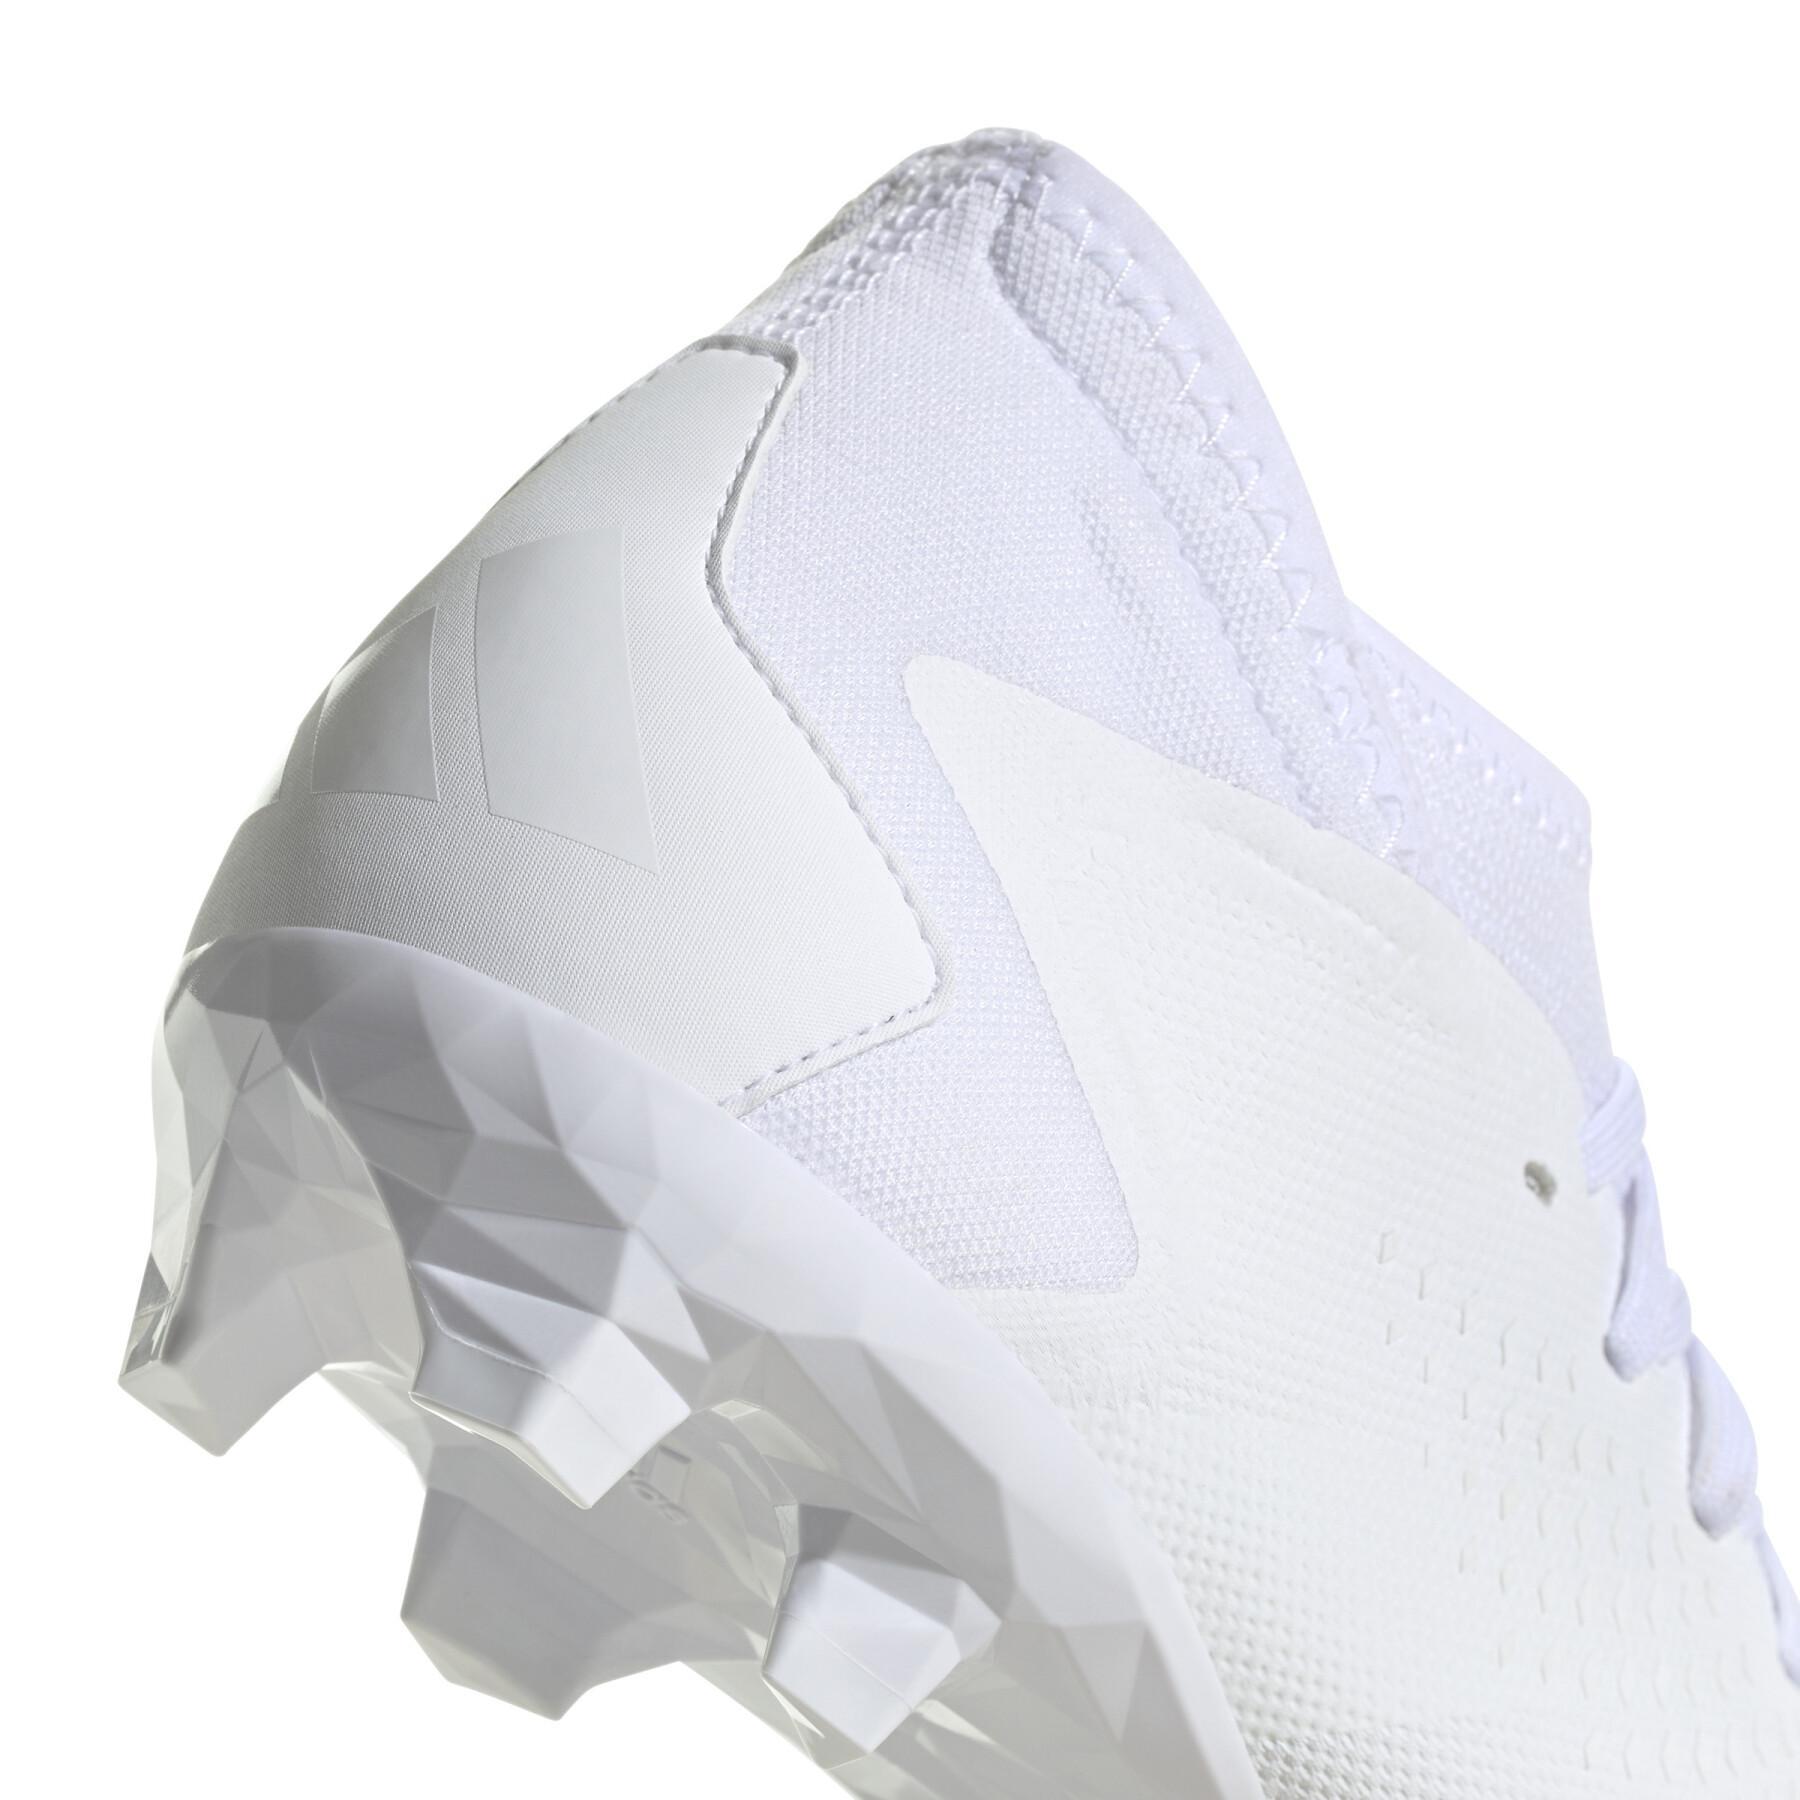 Soccer cleats adidas Predator Accuracy.3 - Pearlized Pack